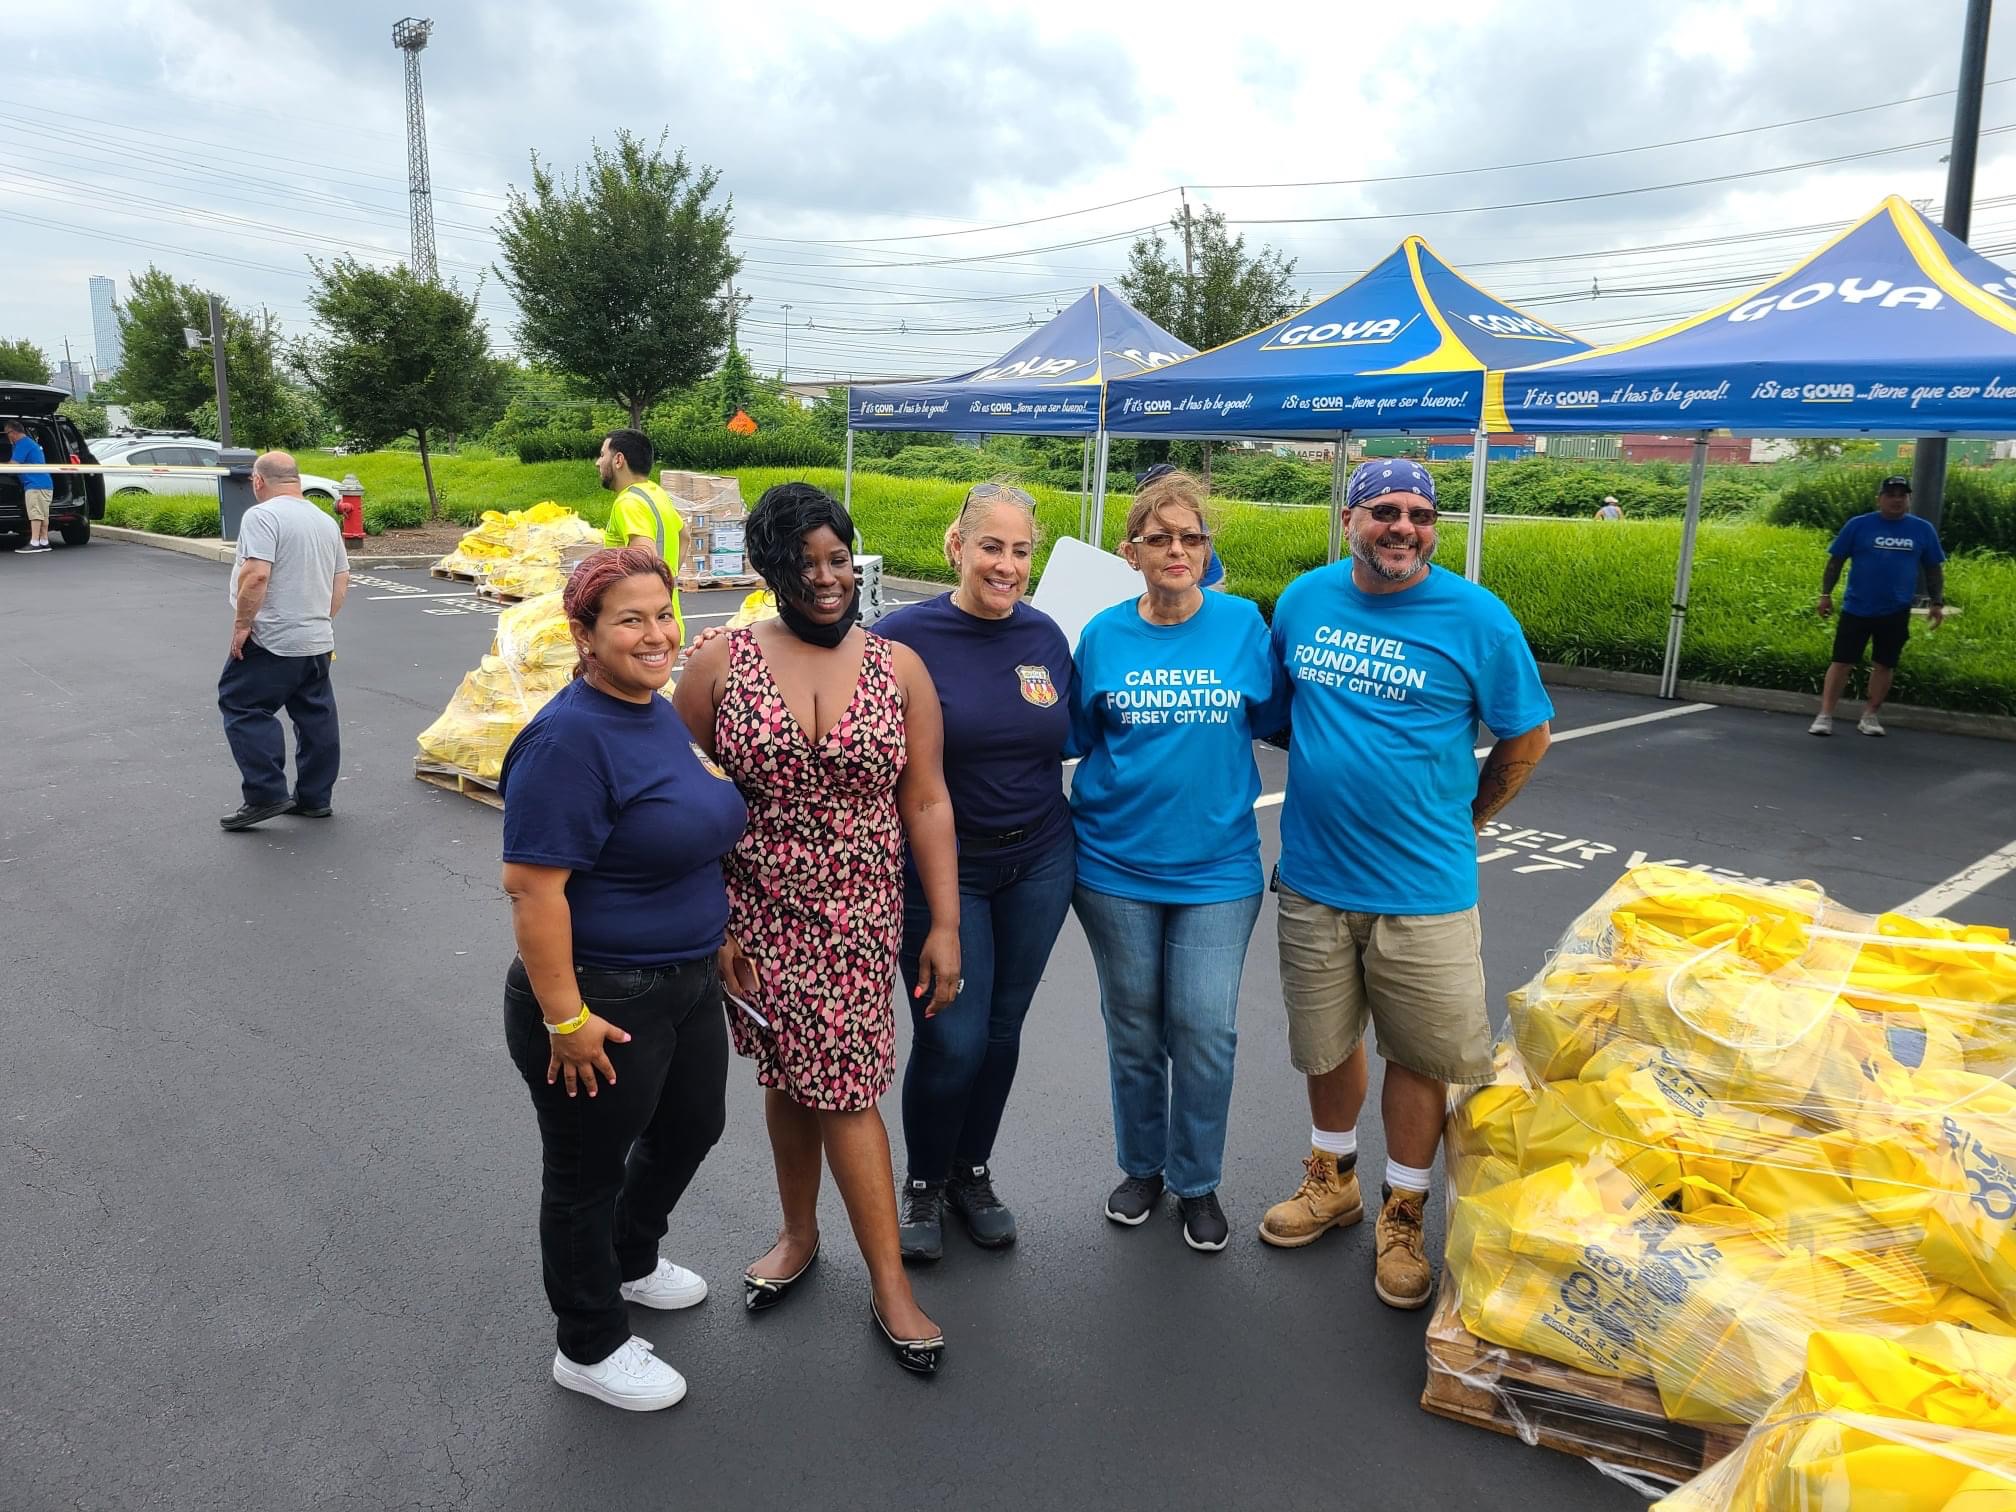 Goya generously contributed 10,000 pounds of non-perishable Goya products to support families in need across Hudson County. The image captures the heartwarming moment of our coalition members receiving food supplies from the donation to distribute to